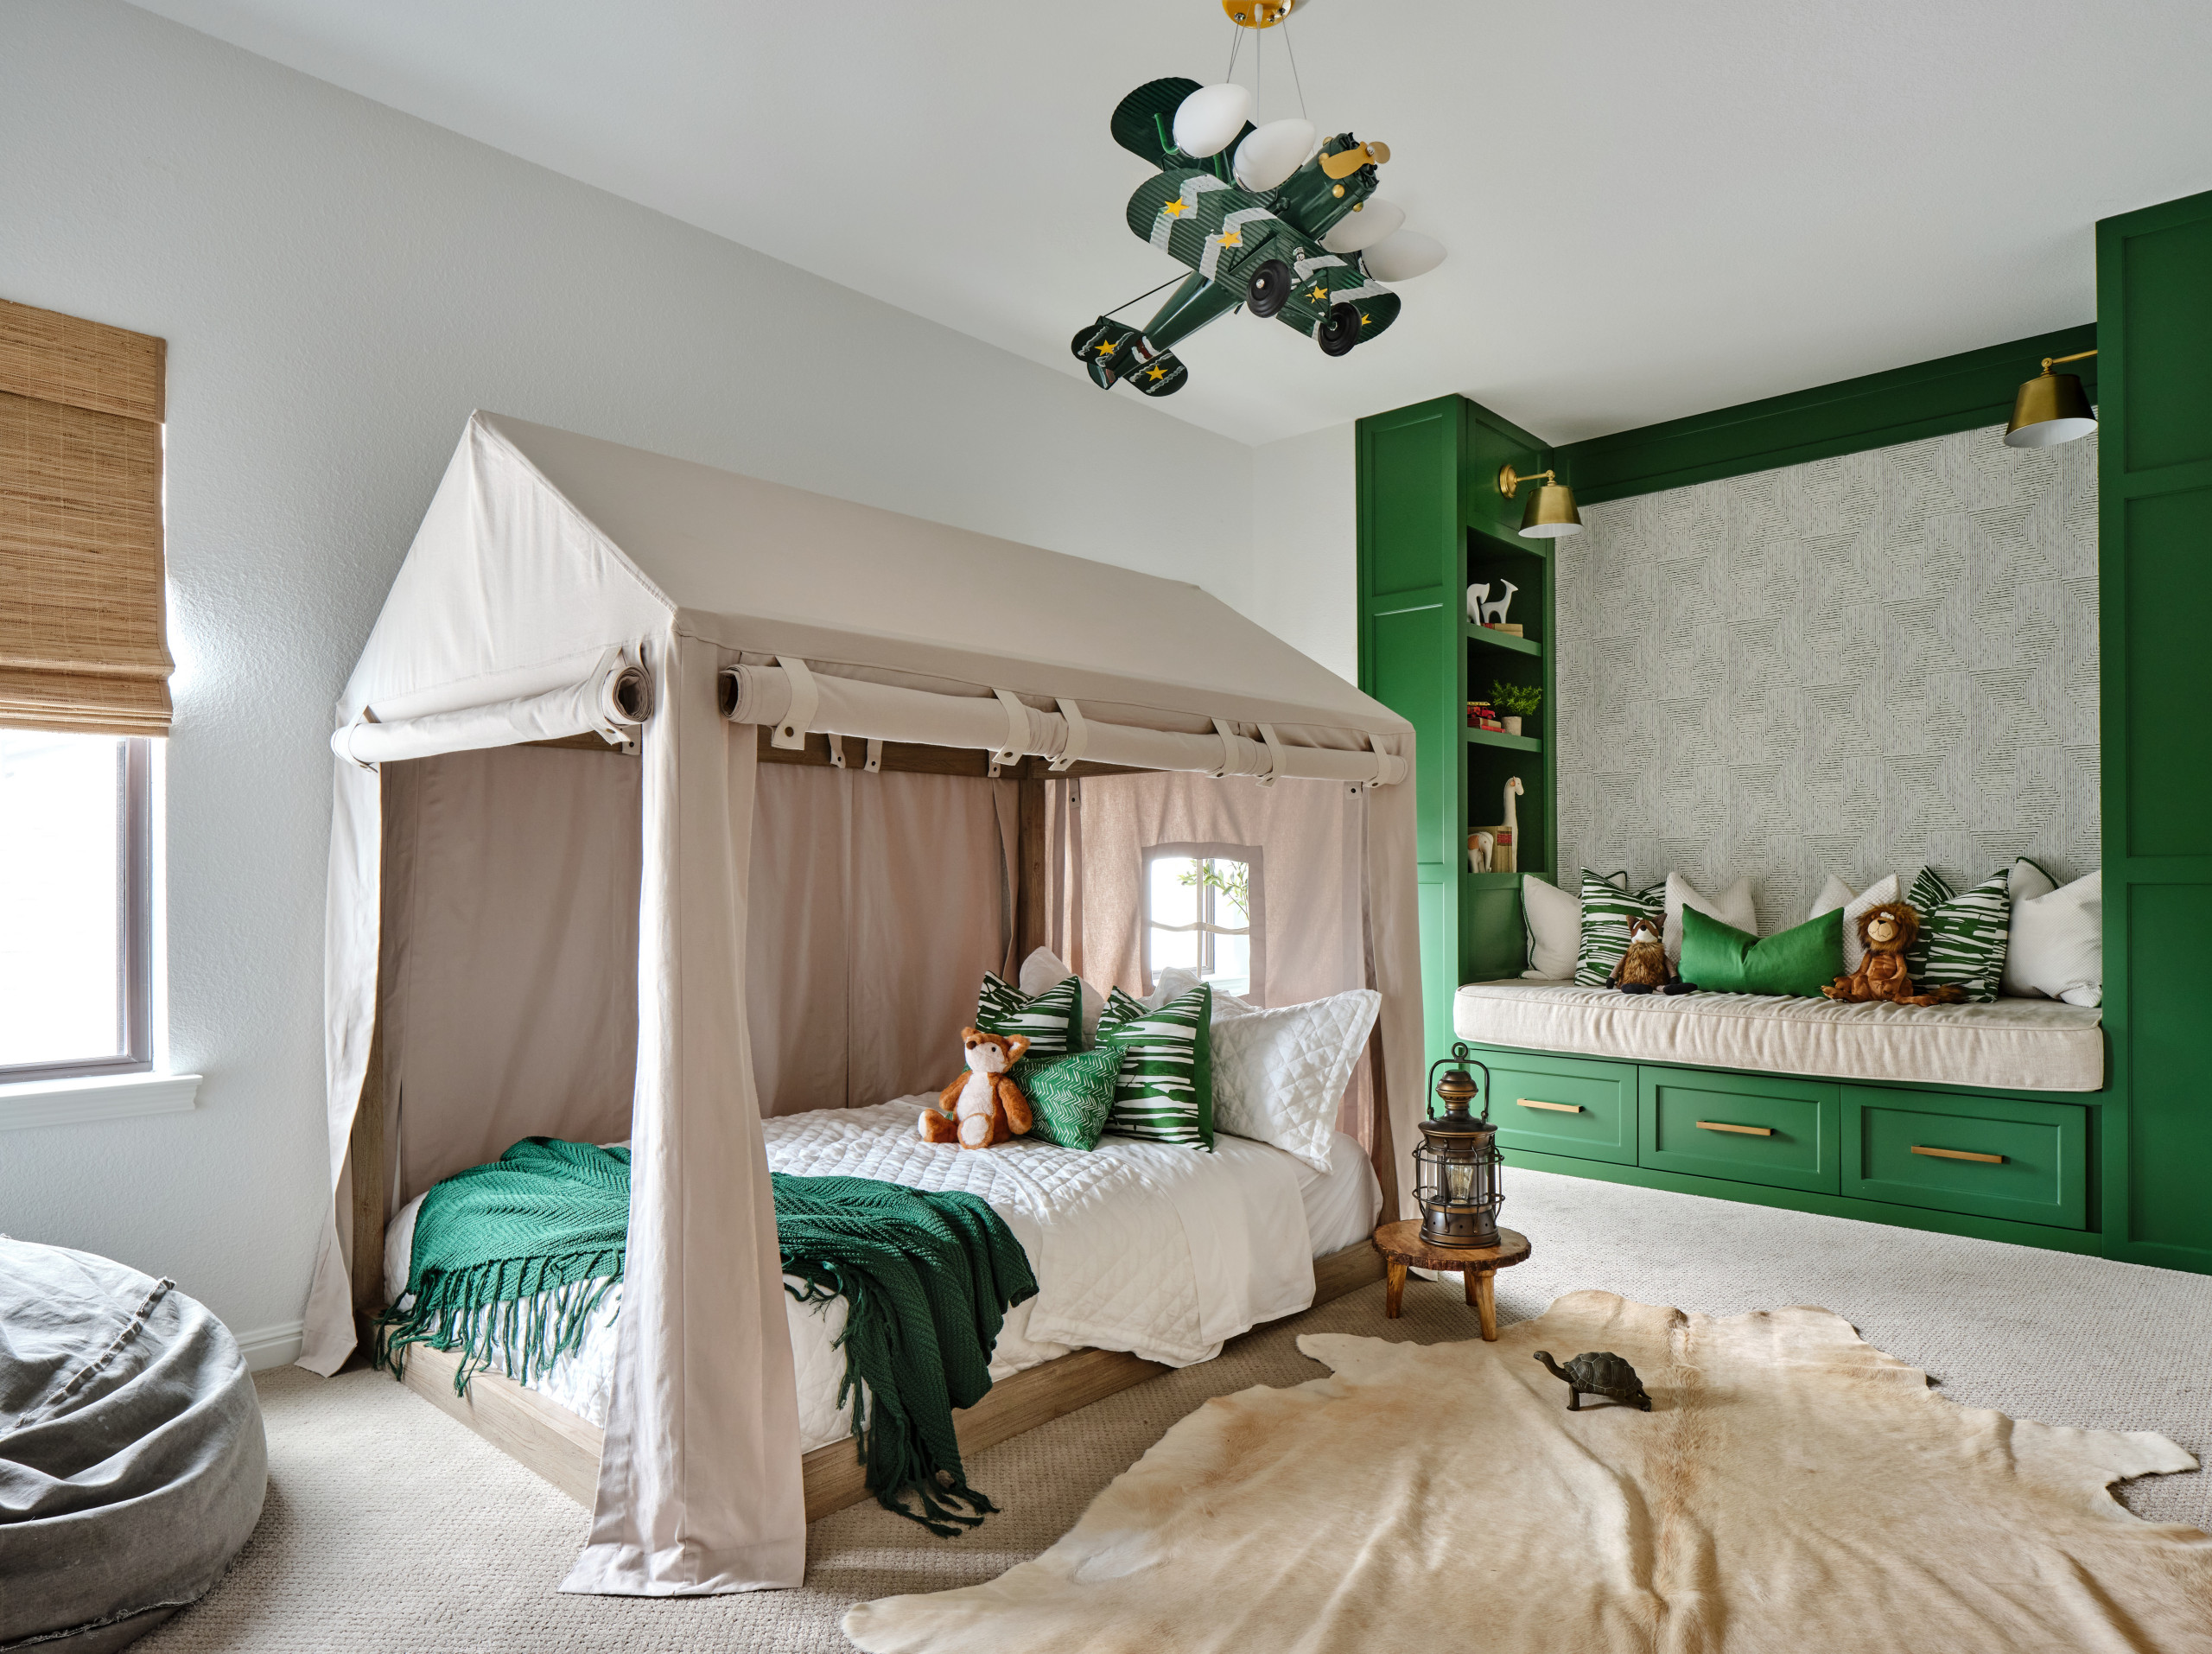 7 Creative Bed Ideas for Children's Rooms | Houzz UK